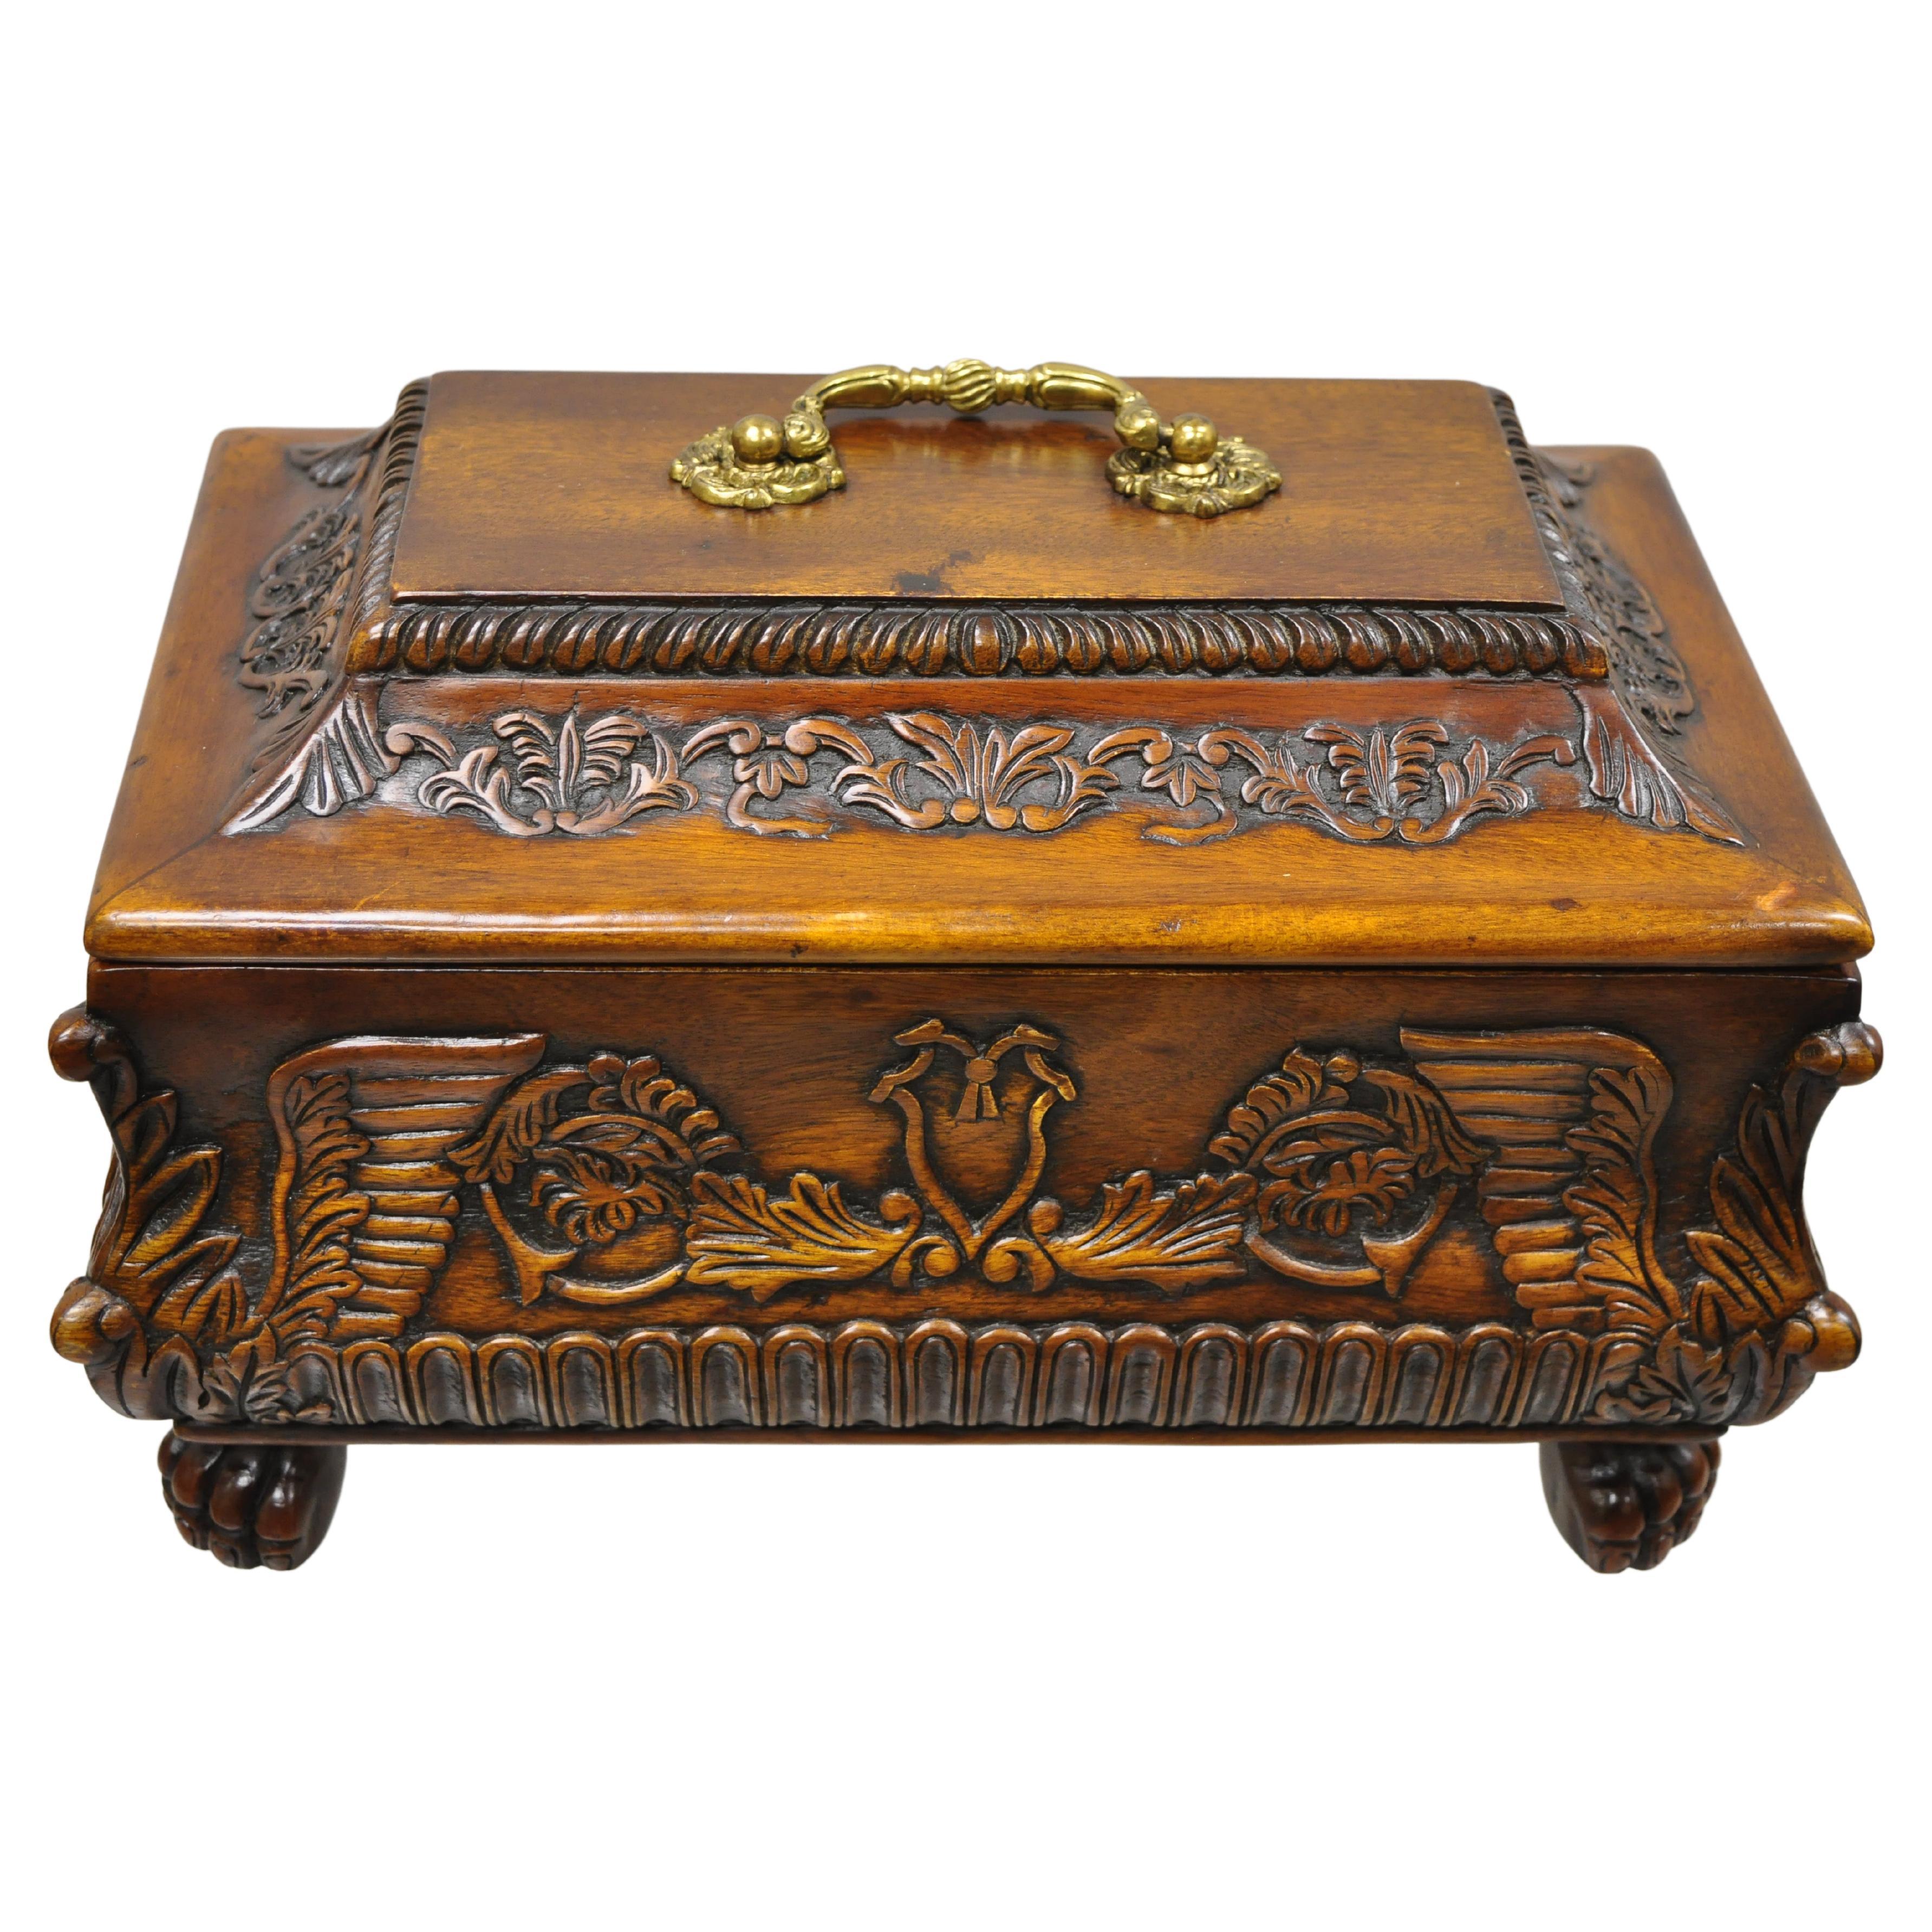 French Empire Rococo Style Carved Mahogany Paw Feet Jewelry Vanity Trinket Box For Sale